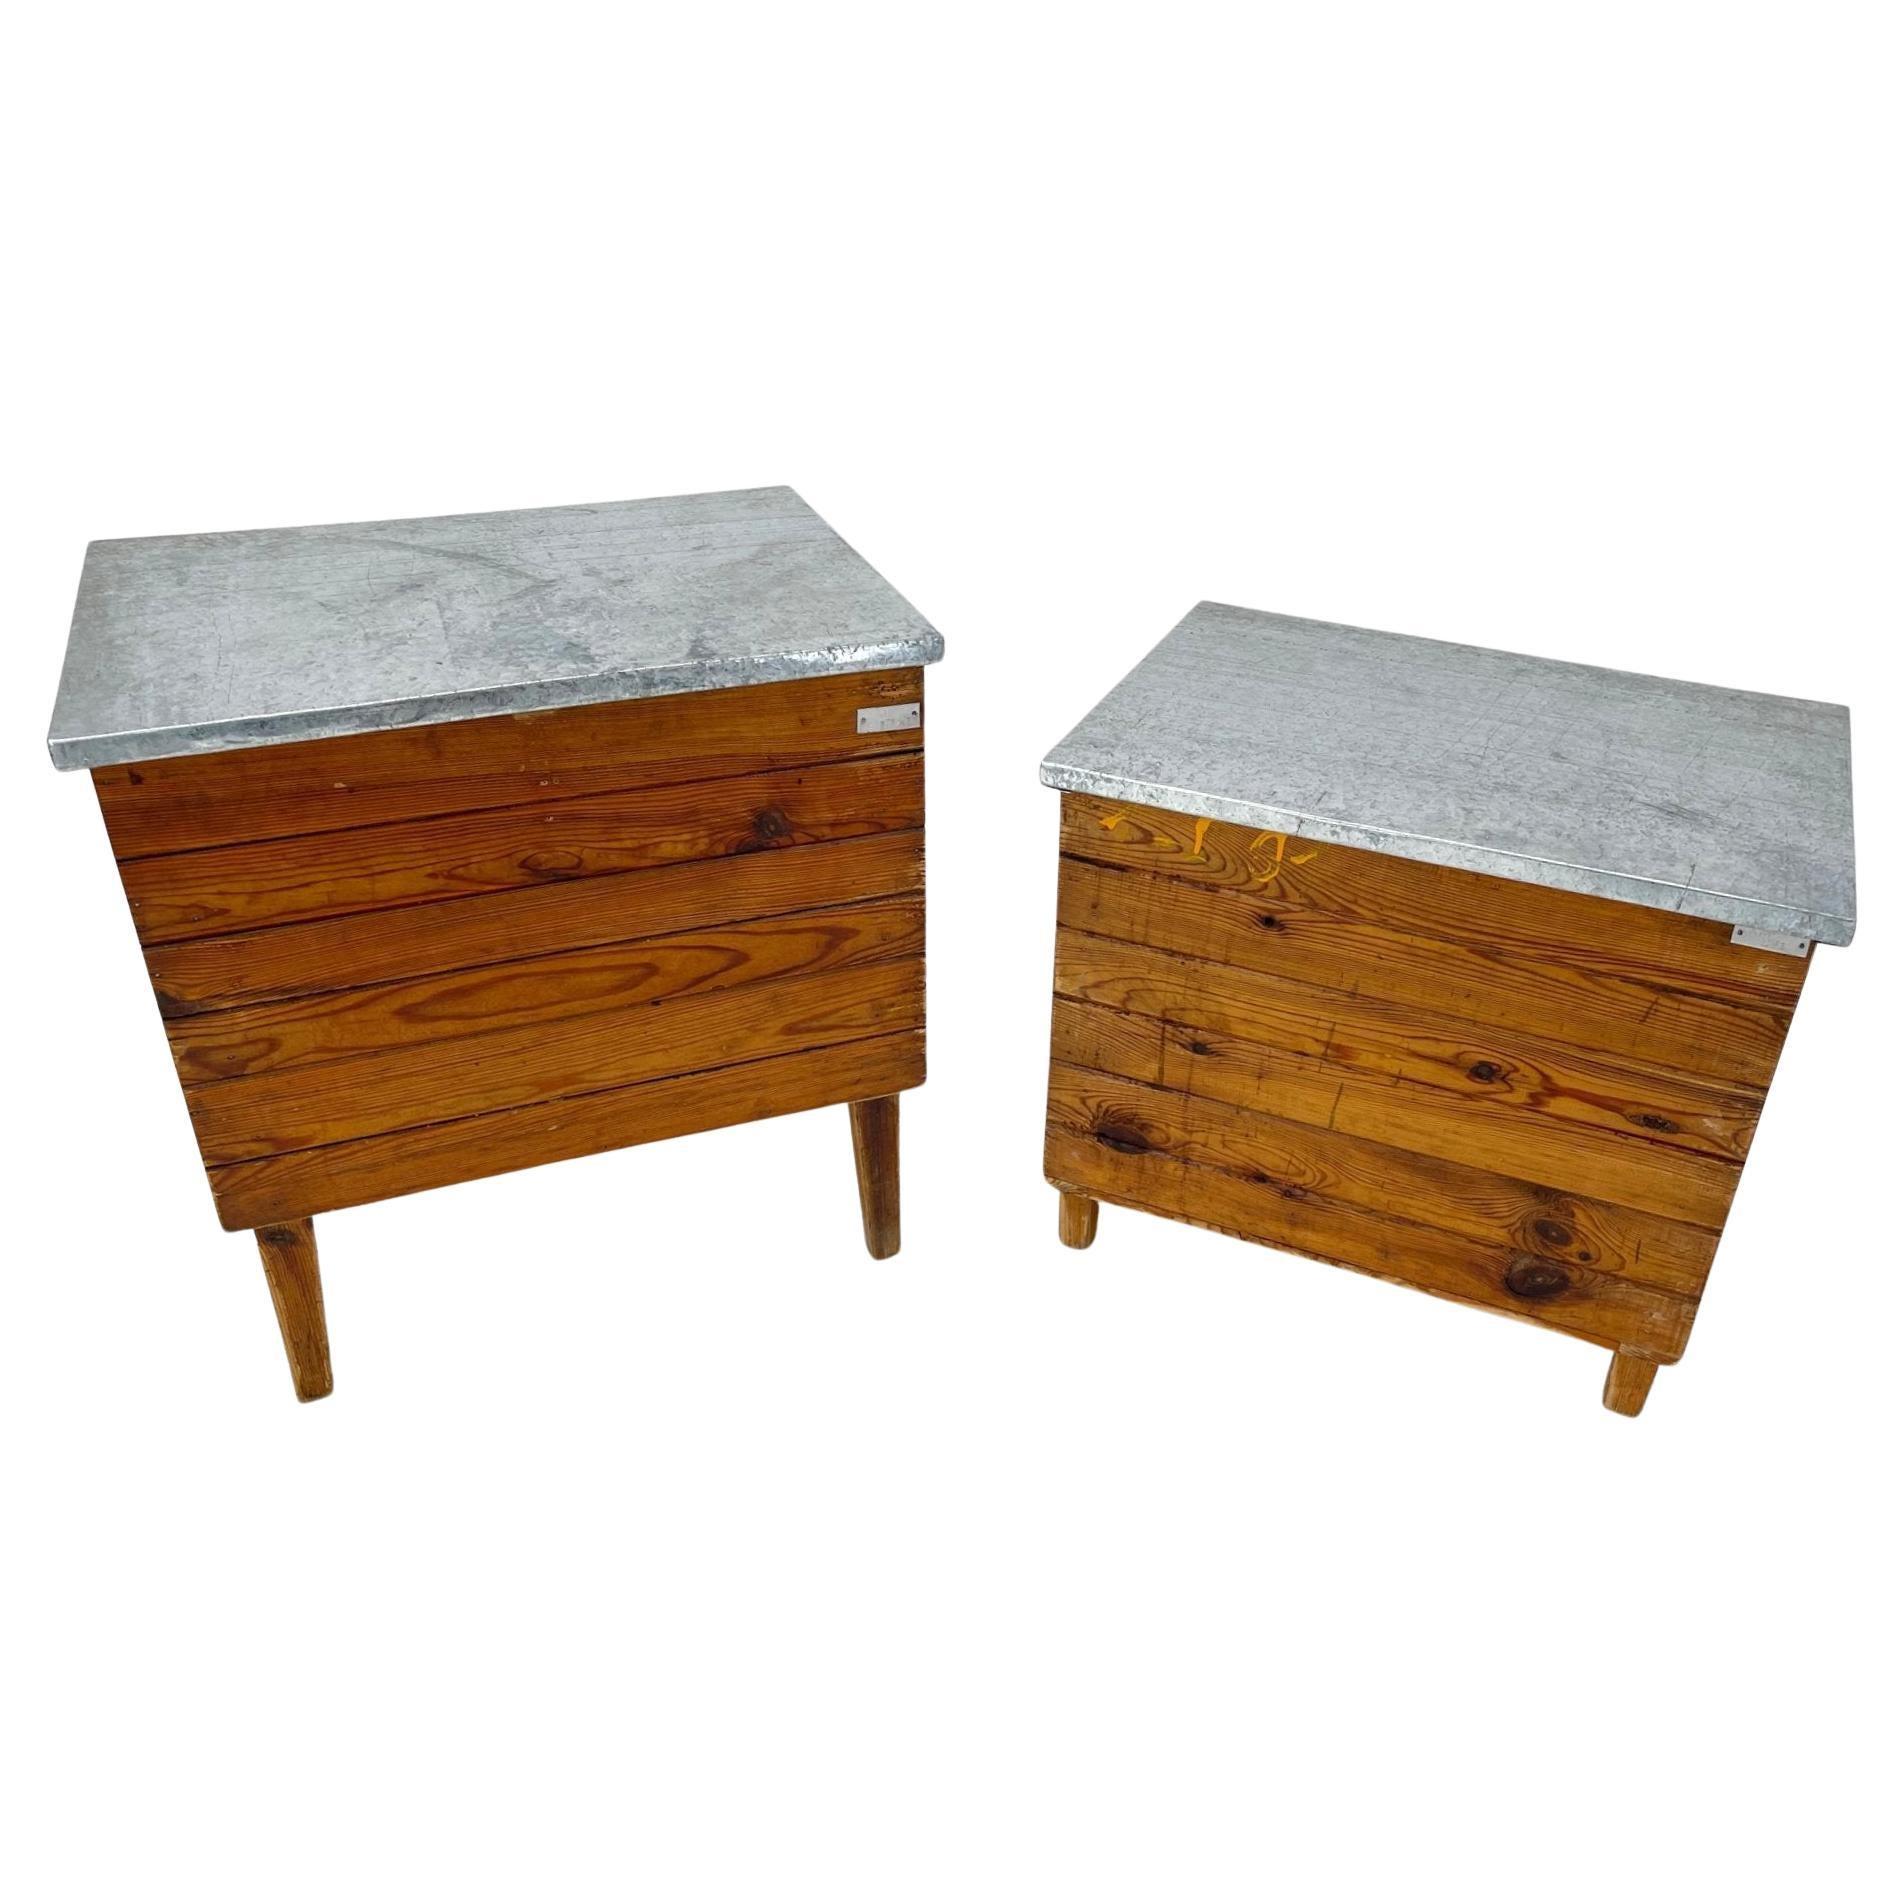 Vintage Industrial Chests or Nightstands, 1950's For Sale